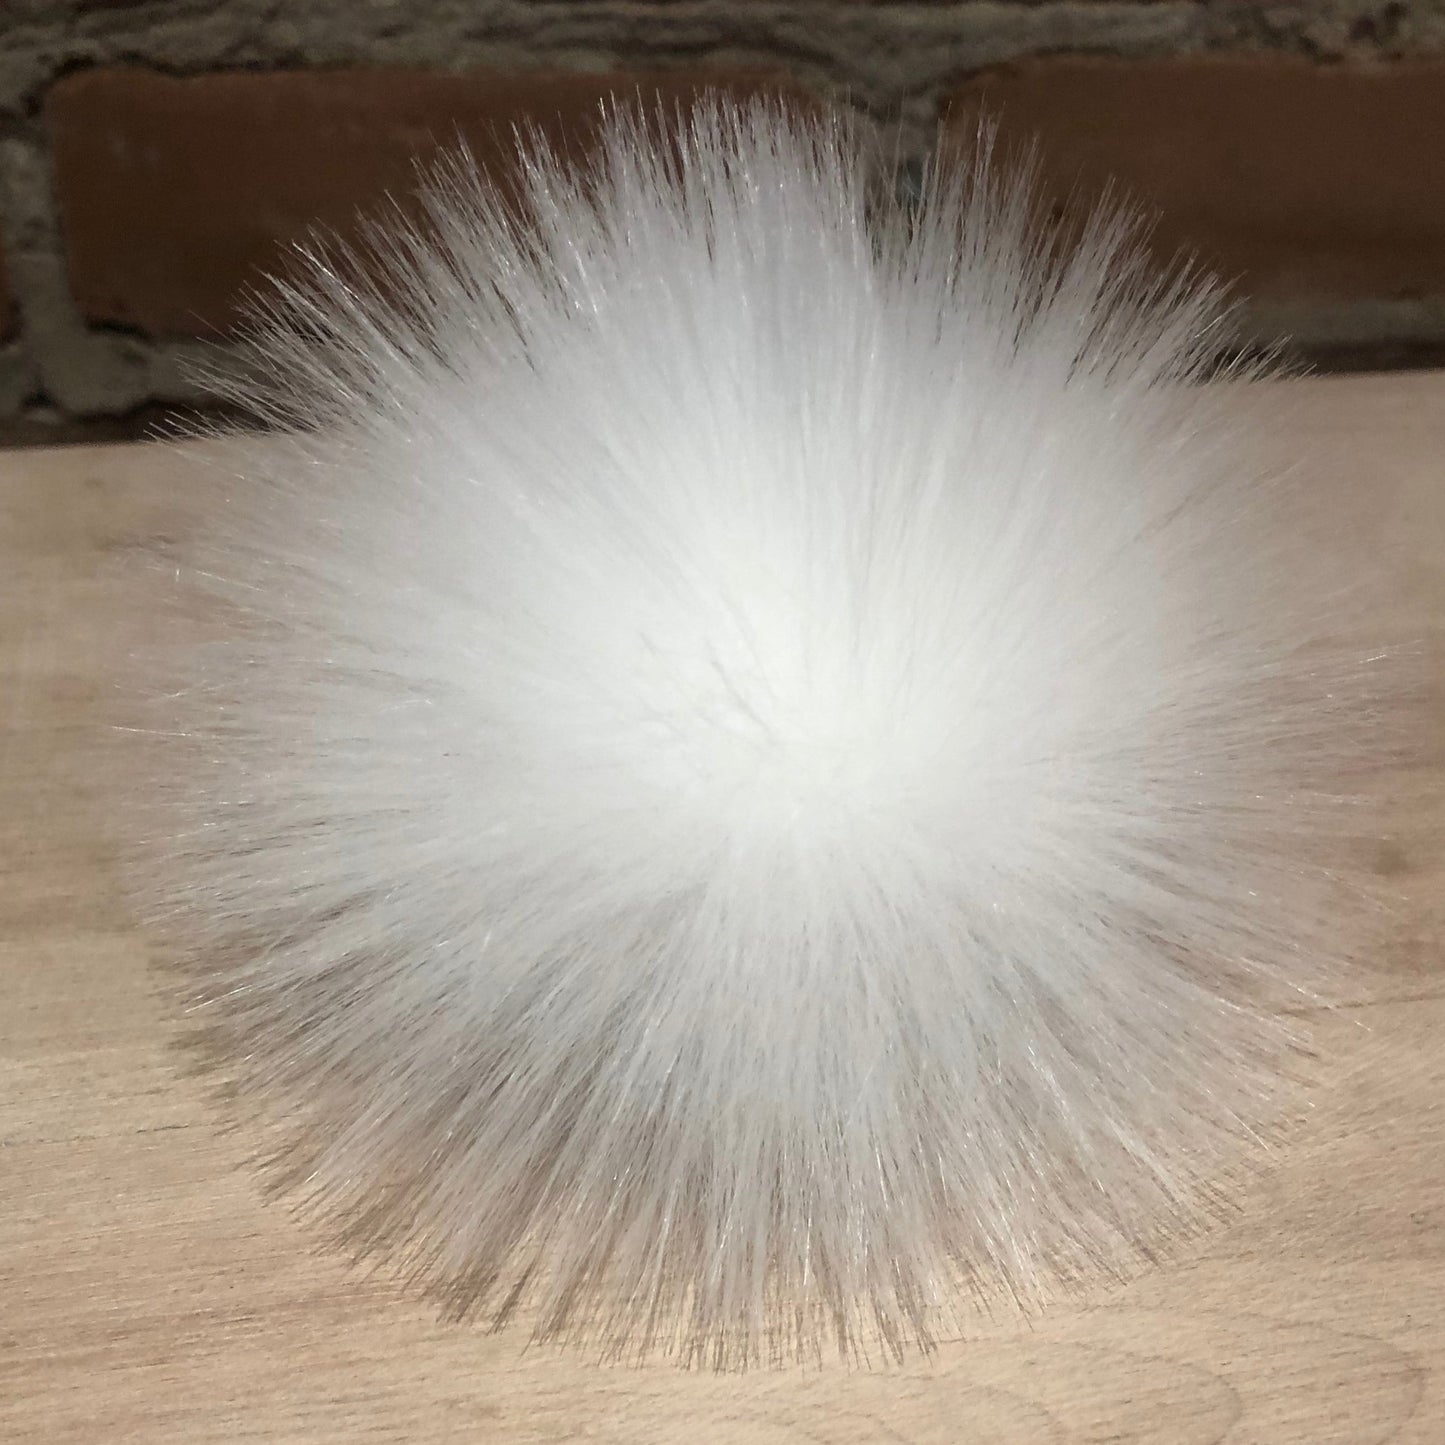 Neat Round Pure White Faux Fur Pom Pom for Knitting Projects